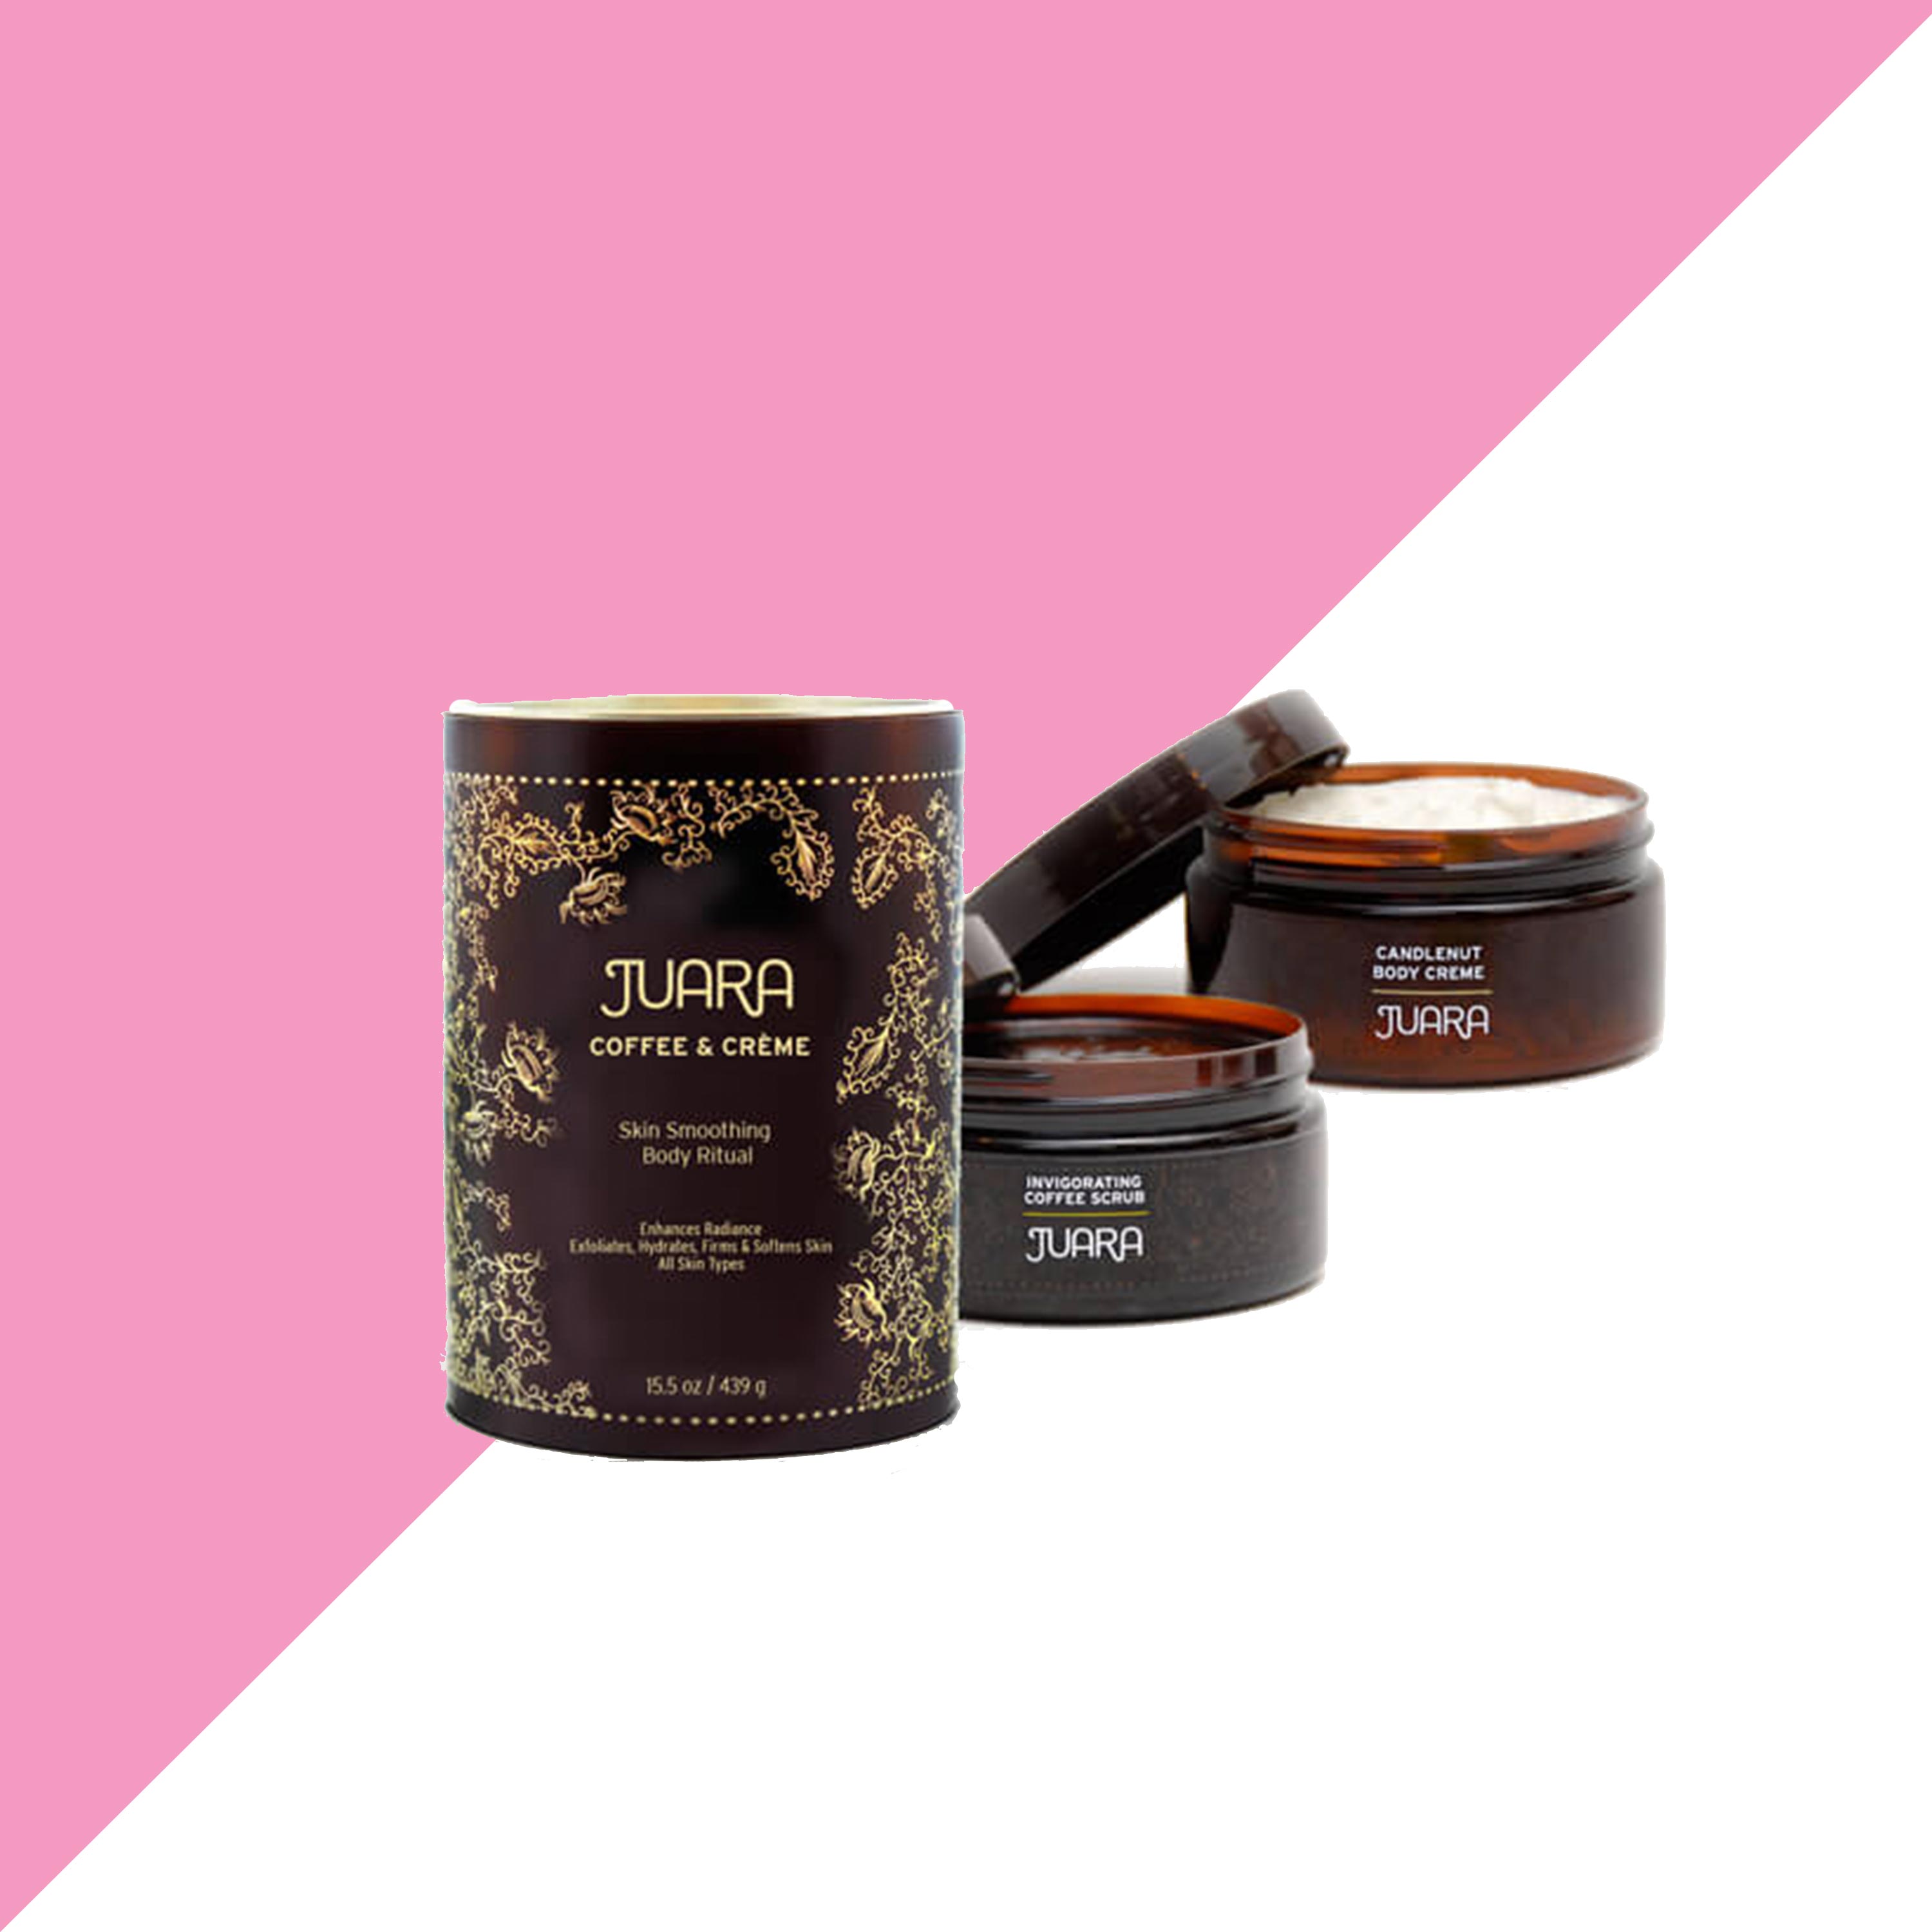 15 Truly Luxurious Mother’s Day Beauty Gifts You Can’t Pass Up